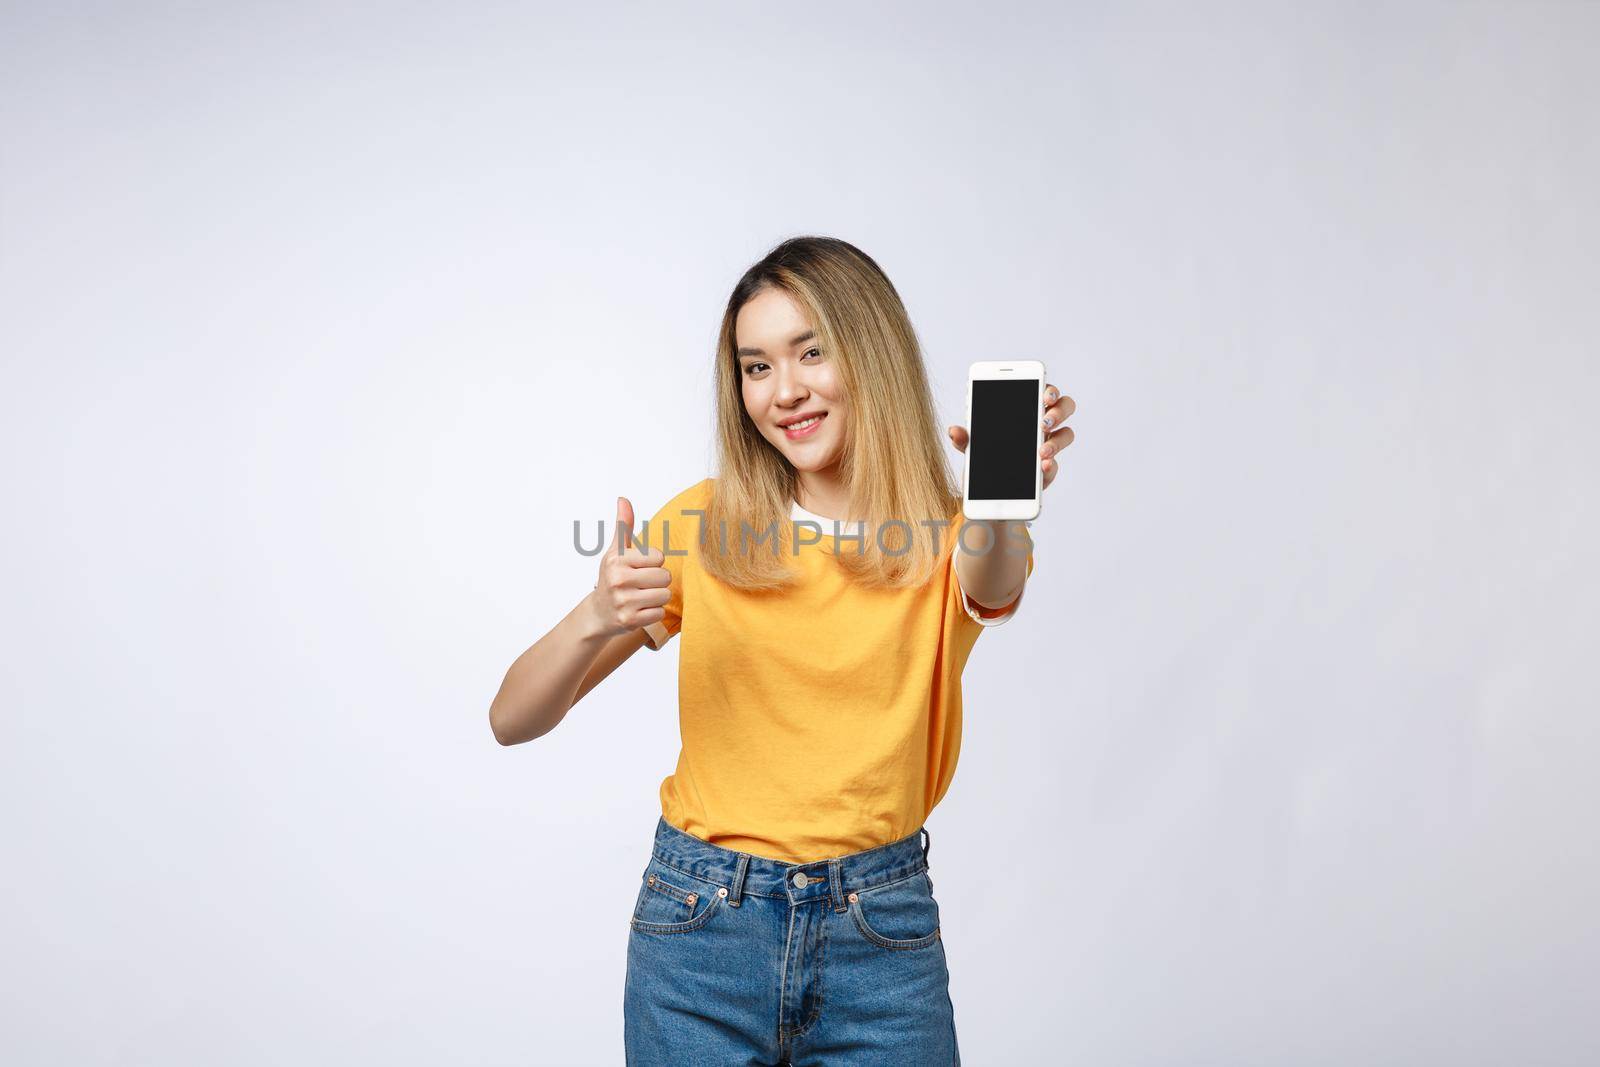 Young Asian woman wearing in yellow shirt is showing thumb up sign on white background, holding mobile phone, smiling